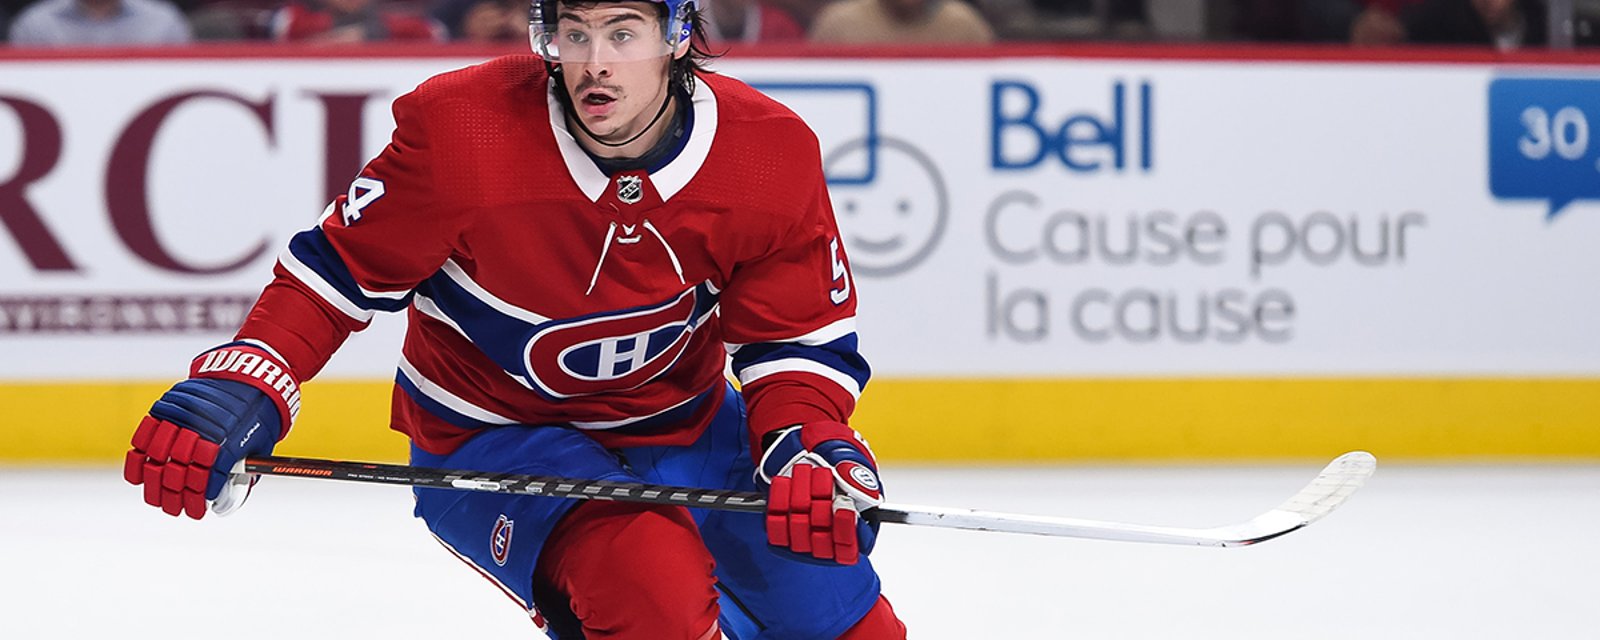 Report: Habs set price and take offers on 24 year old forward